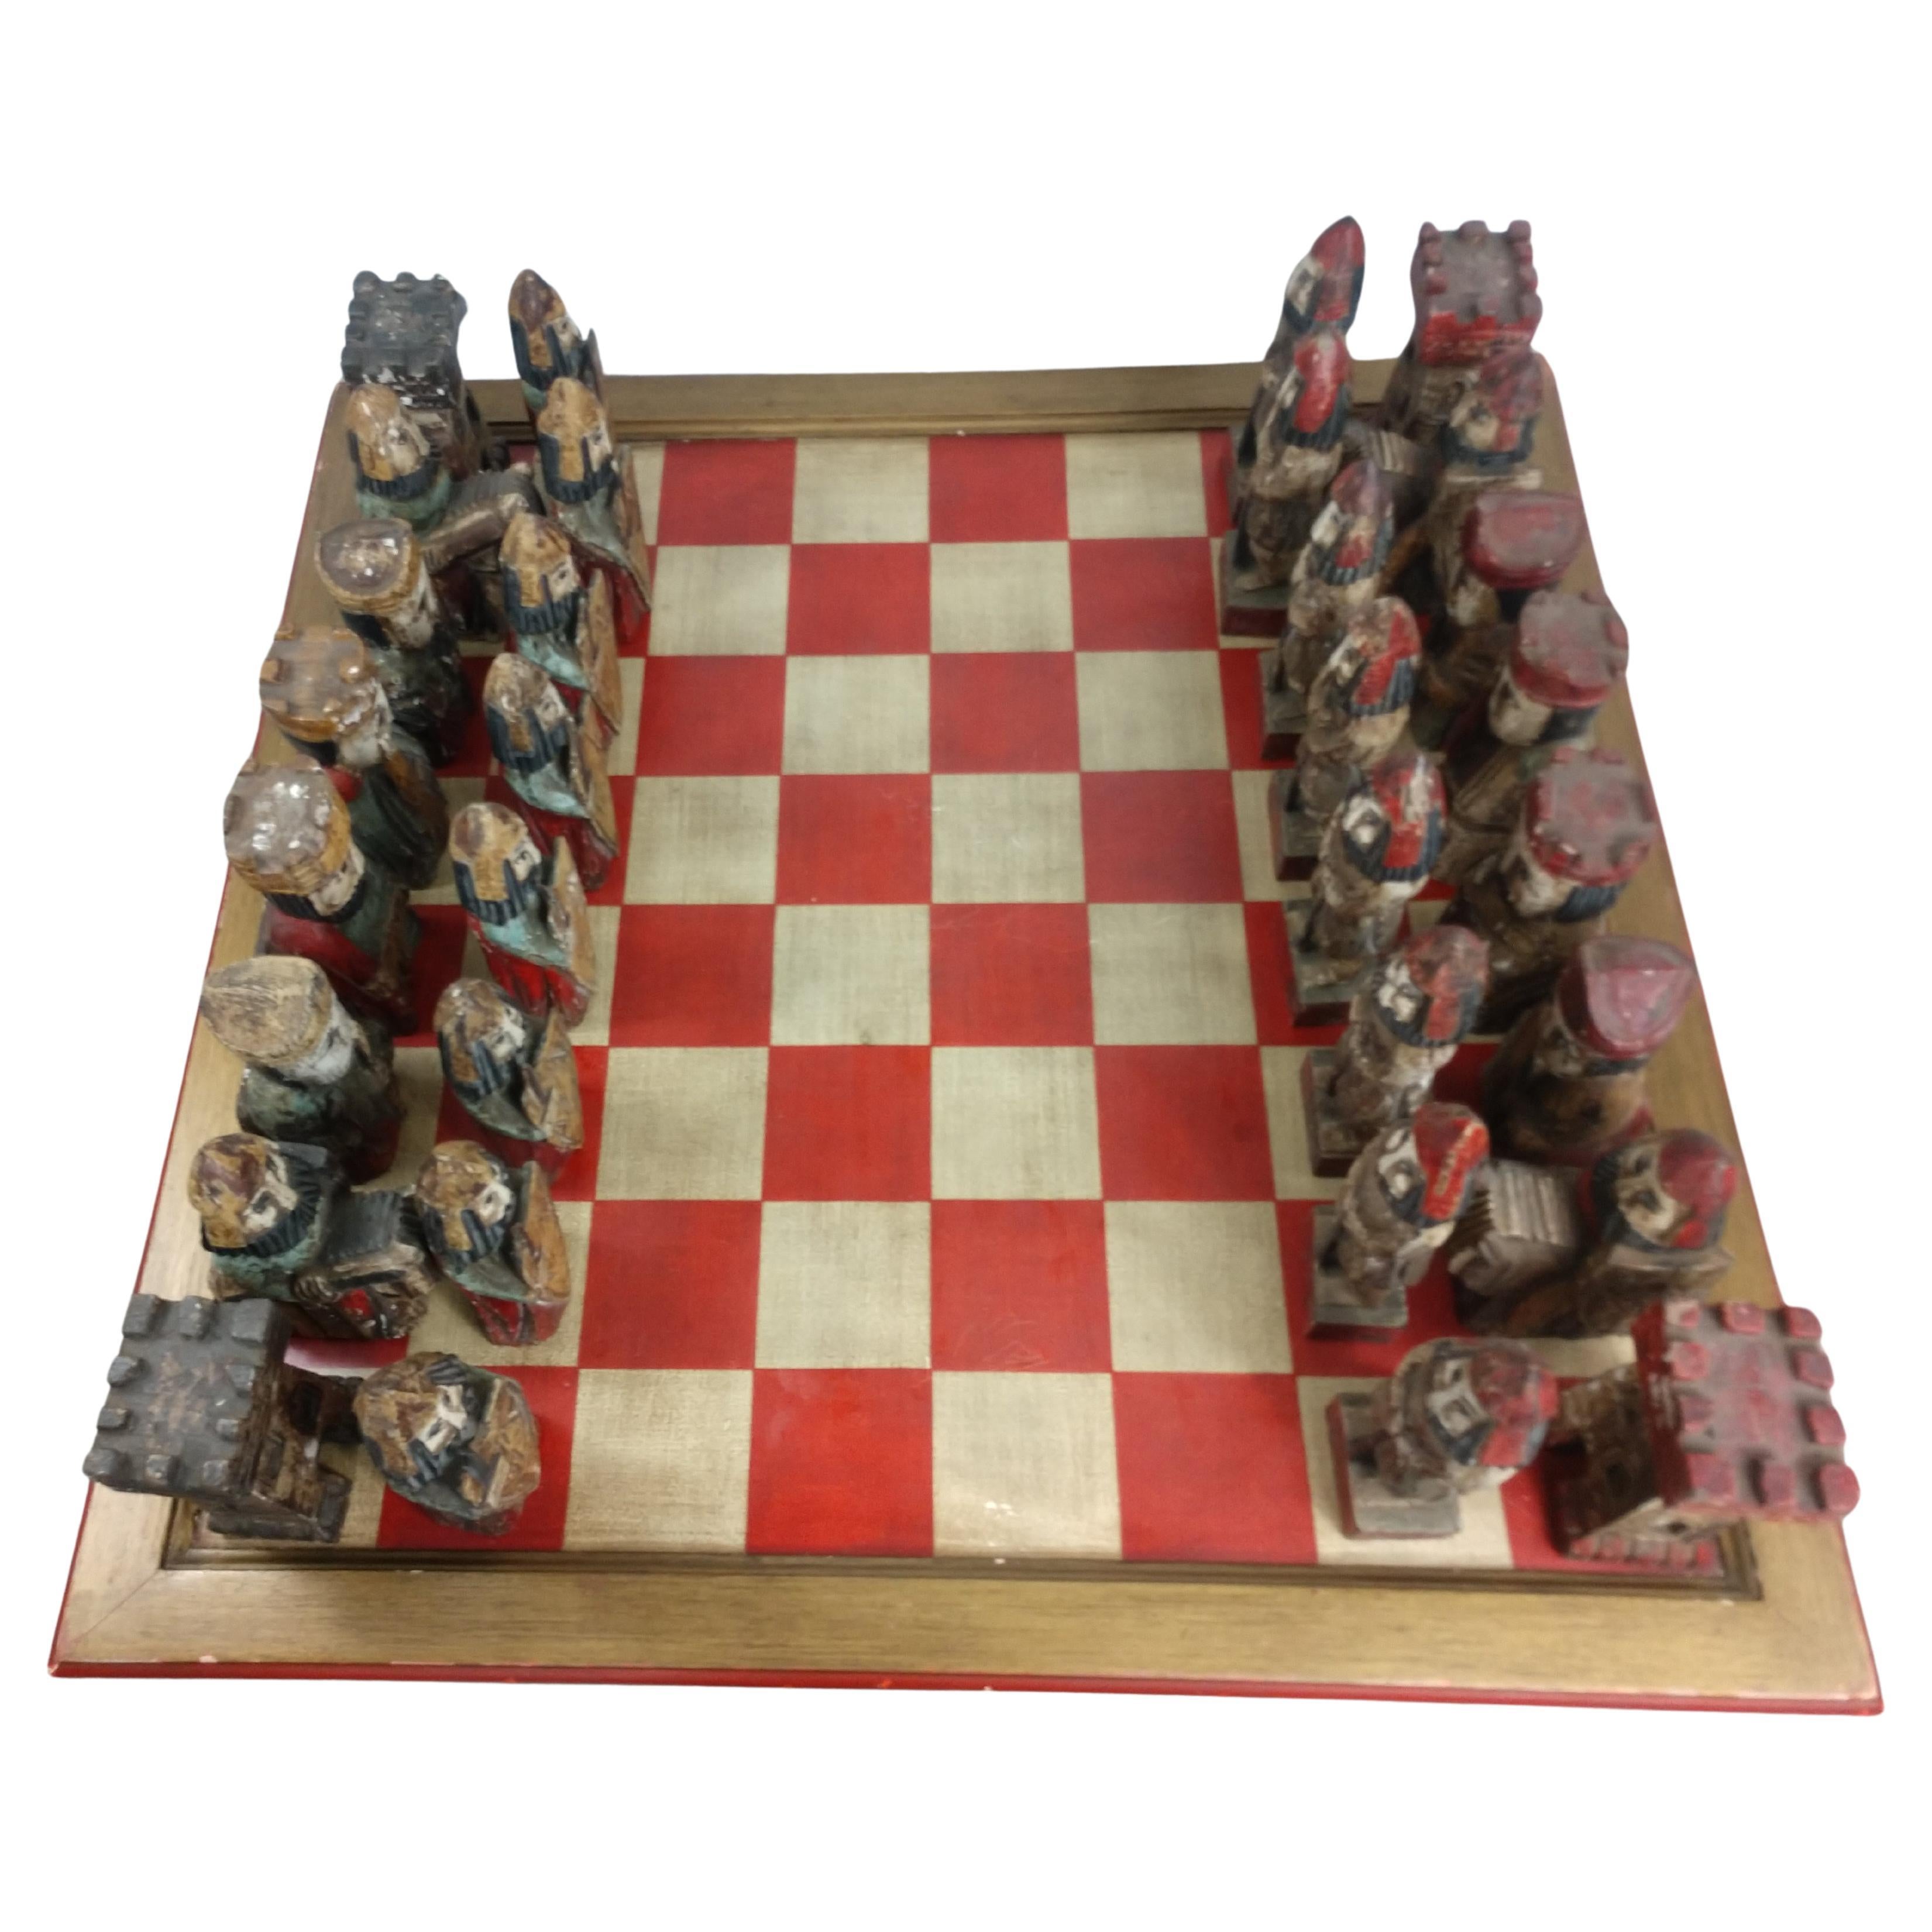 Fabulous game cocktail chess table from the mid sixties. Hand carved and polychrome figures which are easily stored below the chess table top. Great color and fantastic brutalist style wood carvings. Figures are from 10 x 2 x 2 to 9 x 6 x 2 in size.